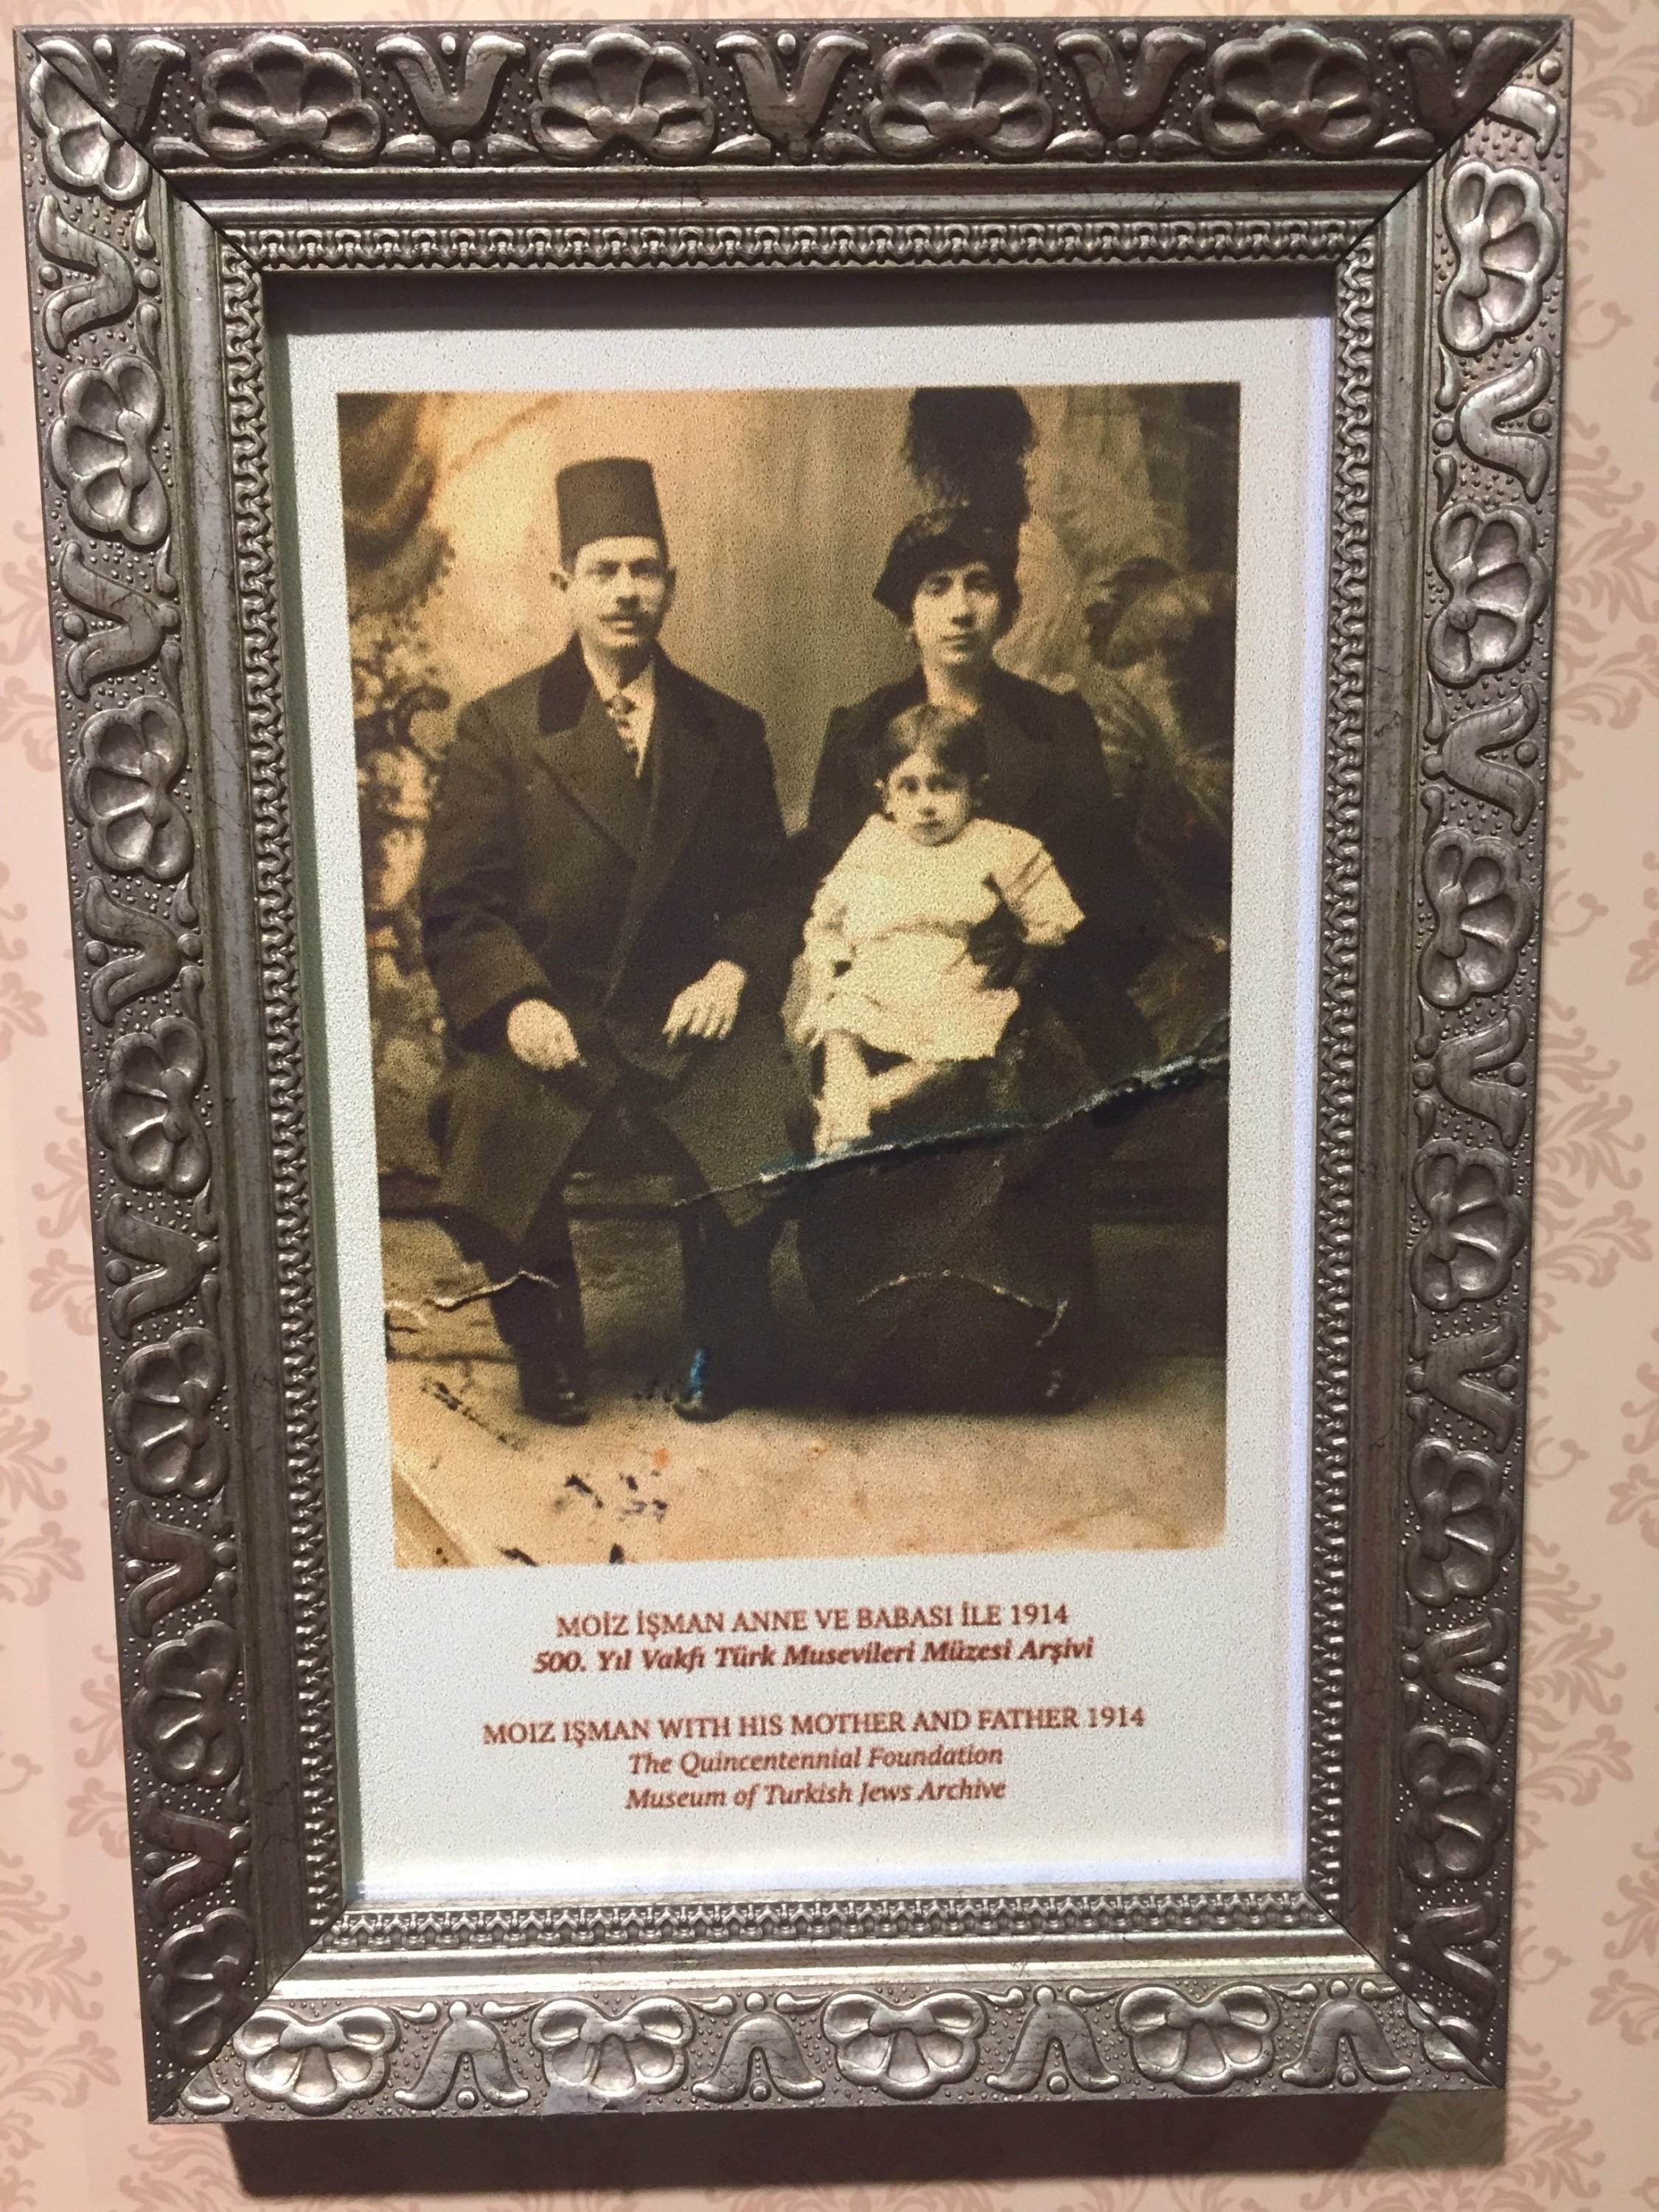 The great-grandparents and grandfather of Nisya Isman Allovi, curator and director of the Jewish museum in Istanbul, Turkey. (Photo by Paris Achen)